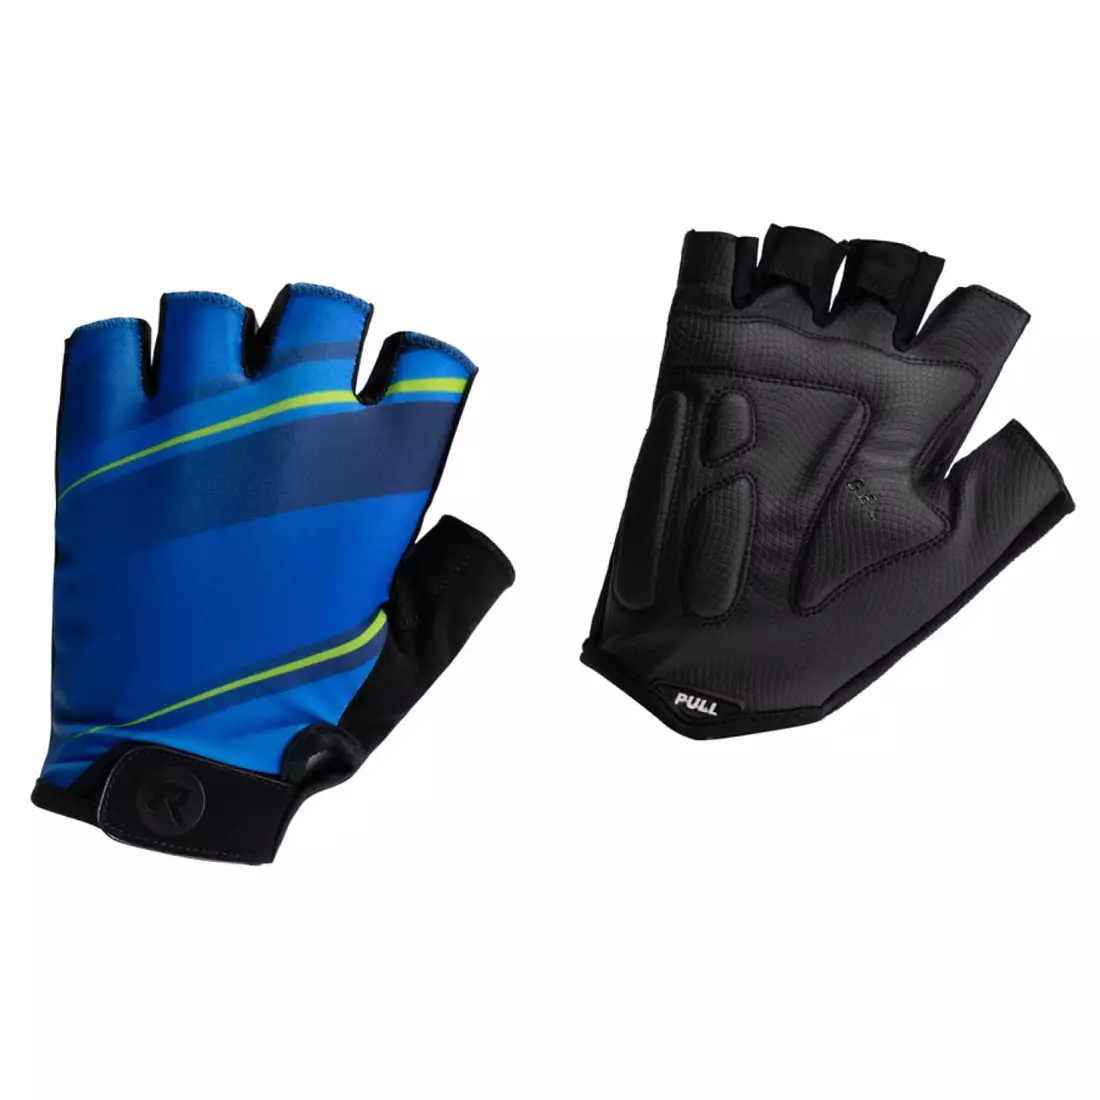 ROGELLI BUZZ Men's cycling gloves, blue and yellow